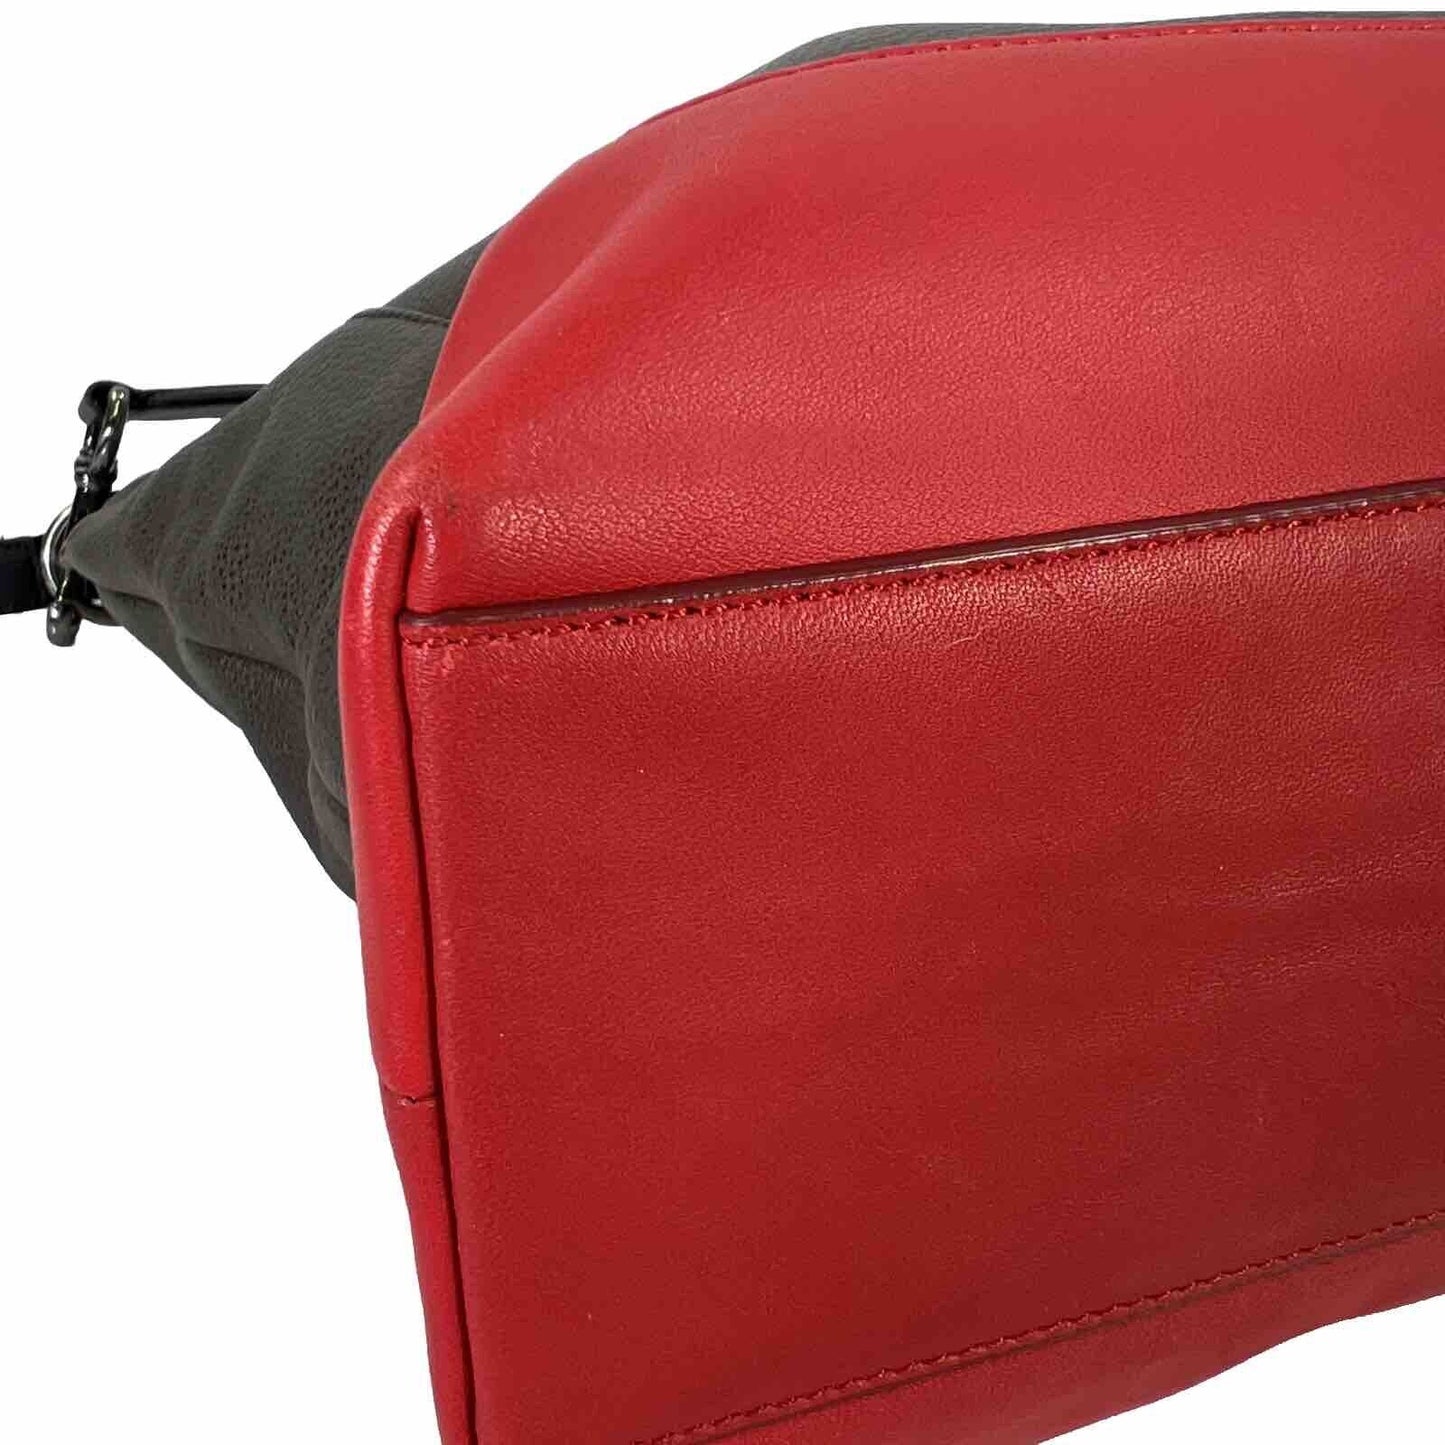 Coach Men's Red/Gray Leather Large Business Tote Bag